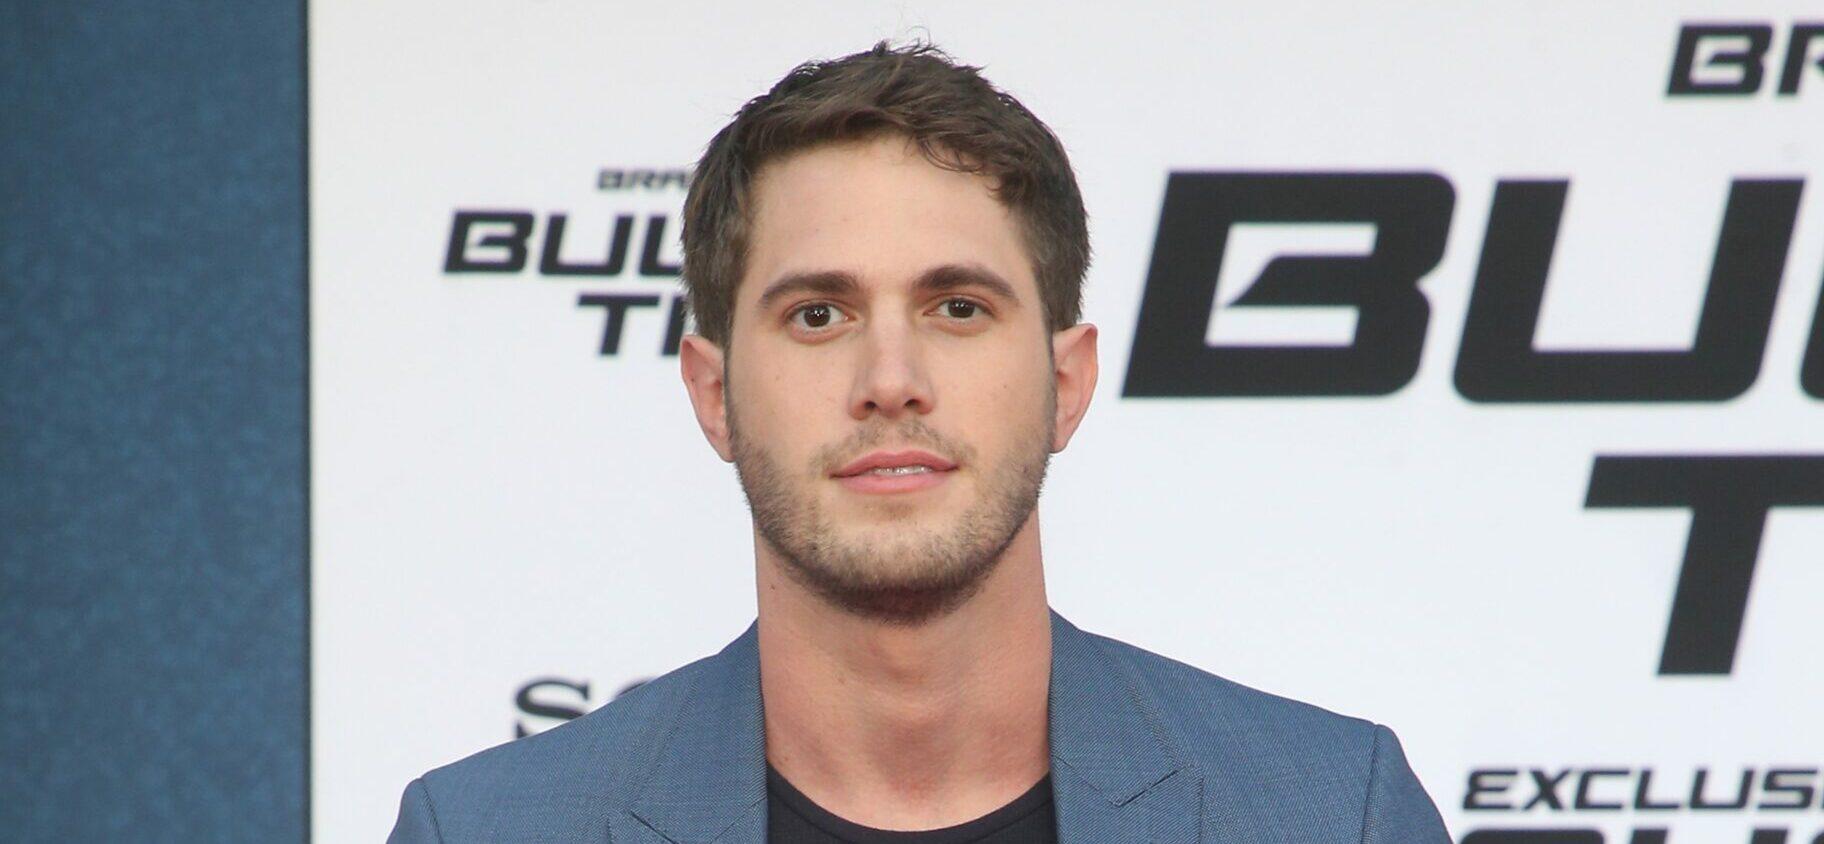 ‘Glee’ Actor Blake Jenner Pleads No Contest To DUI & Gets No Jail Time